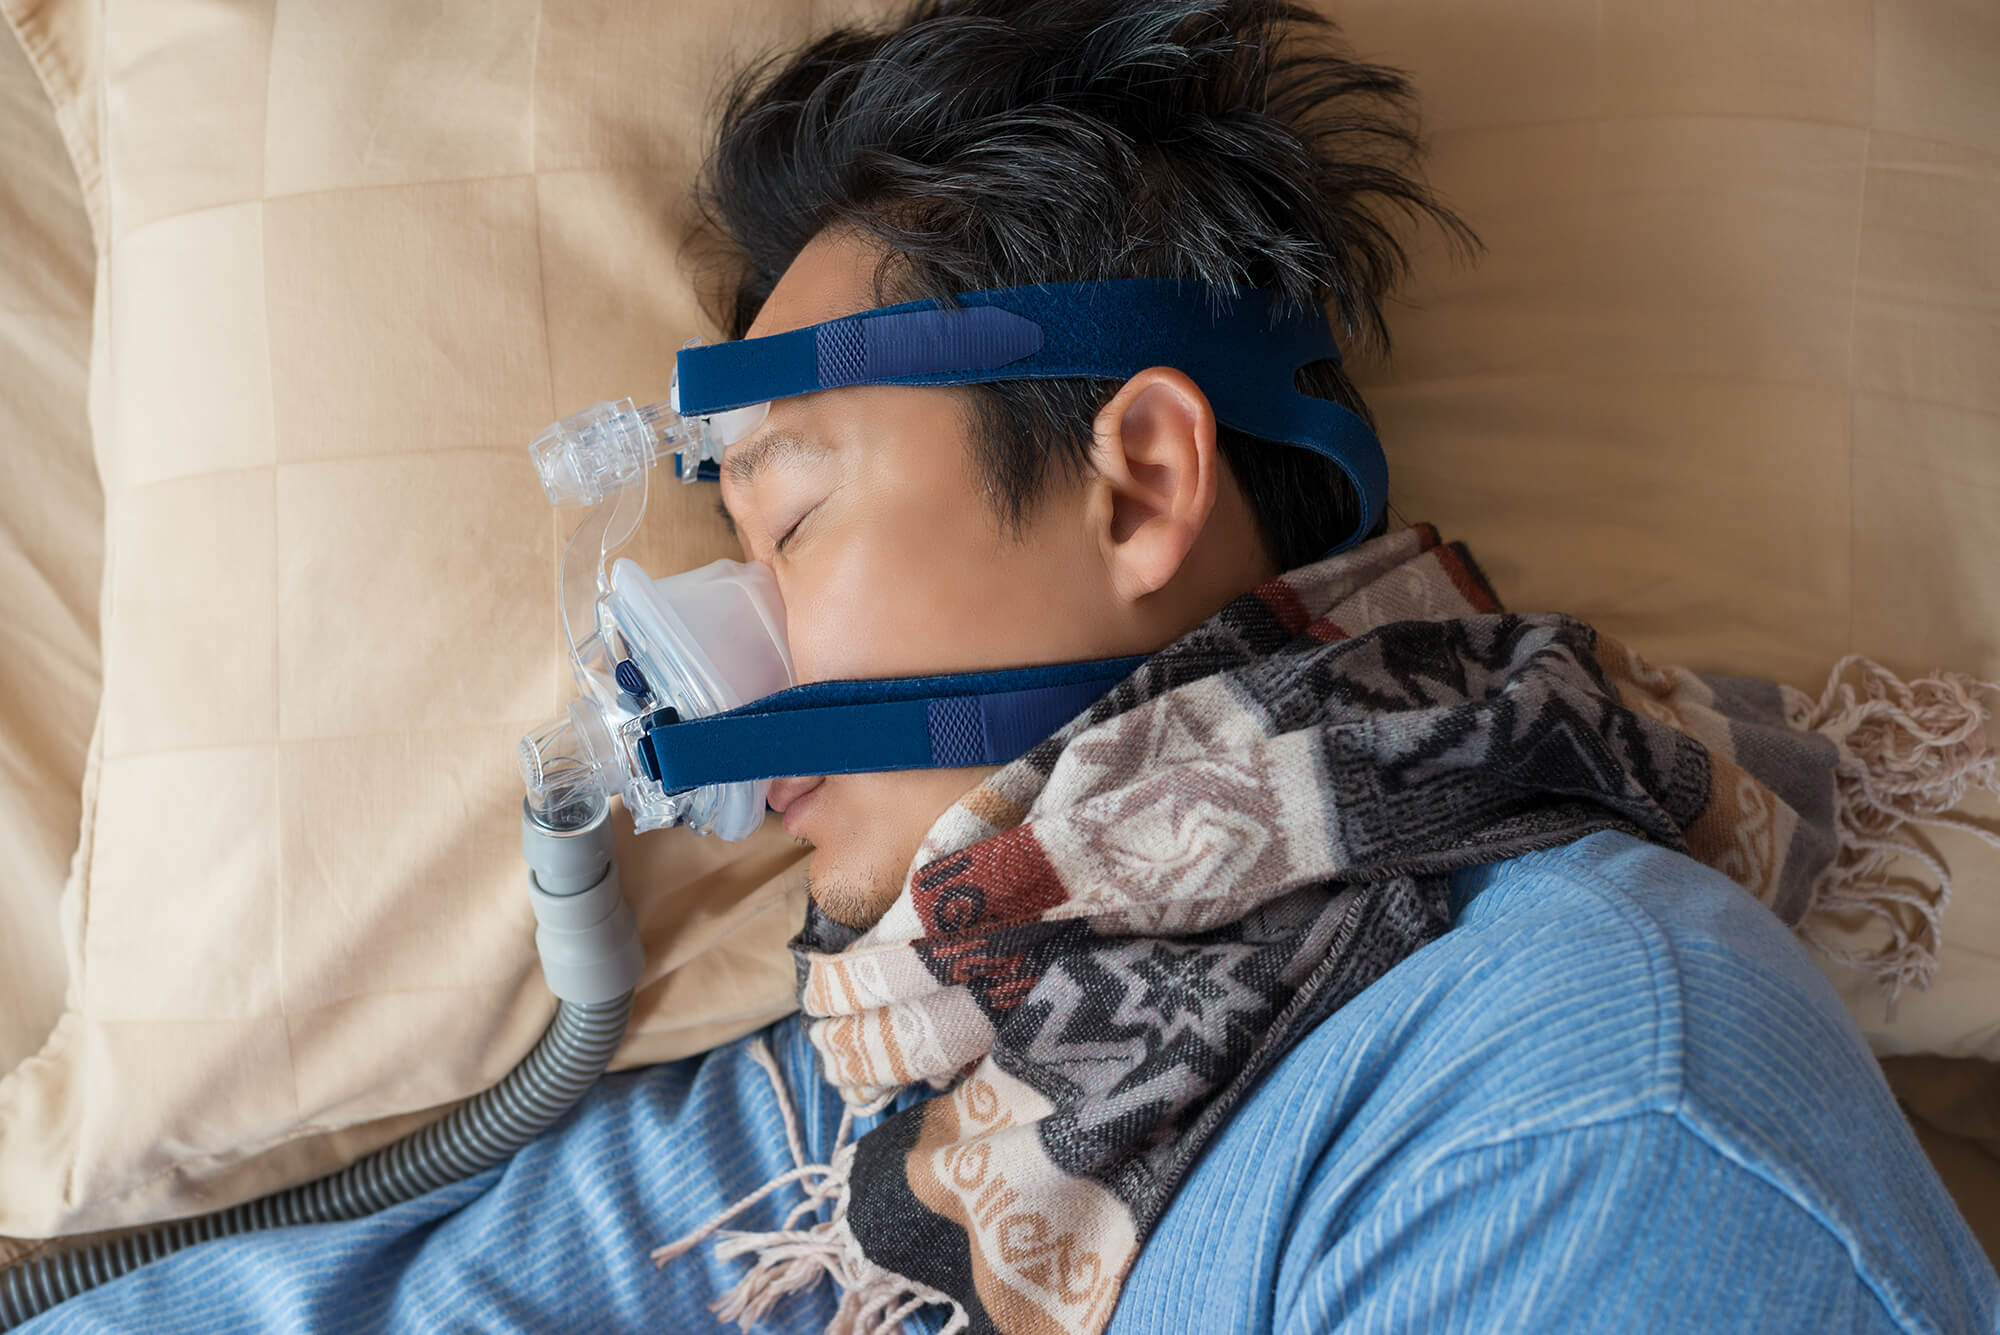 Are your CPAP masks working fine?